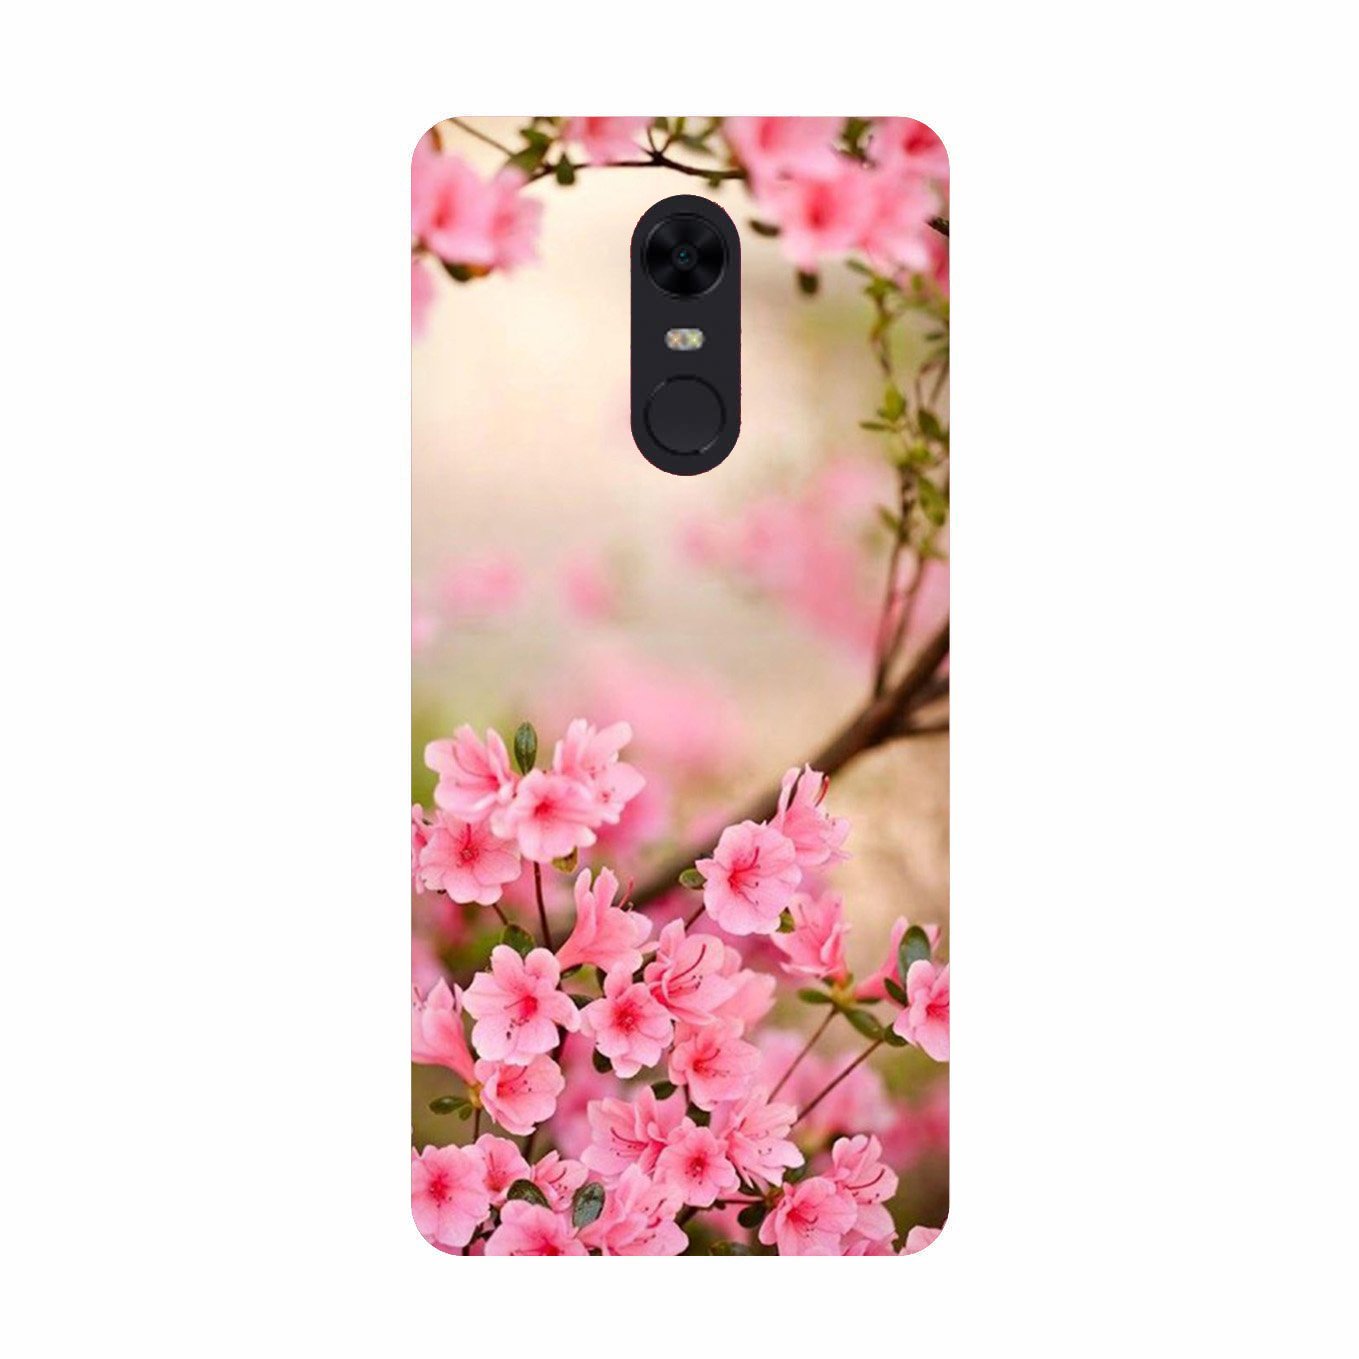 Pink flowers Case for Redmi 5